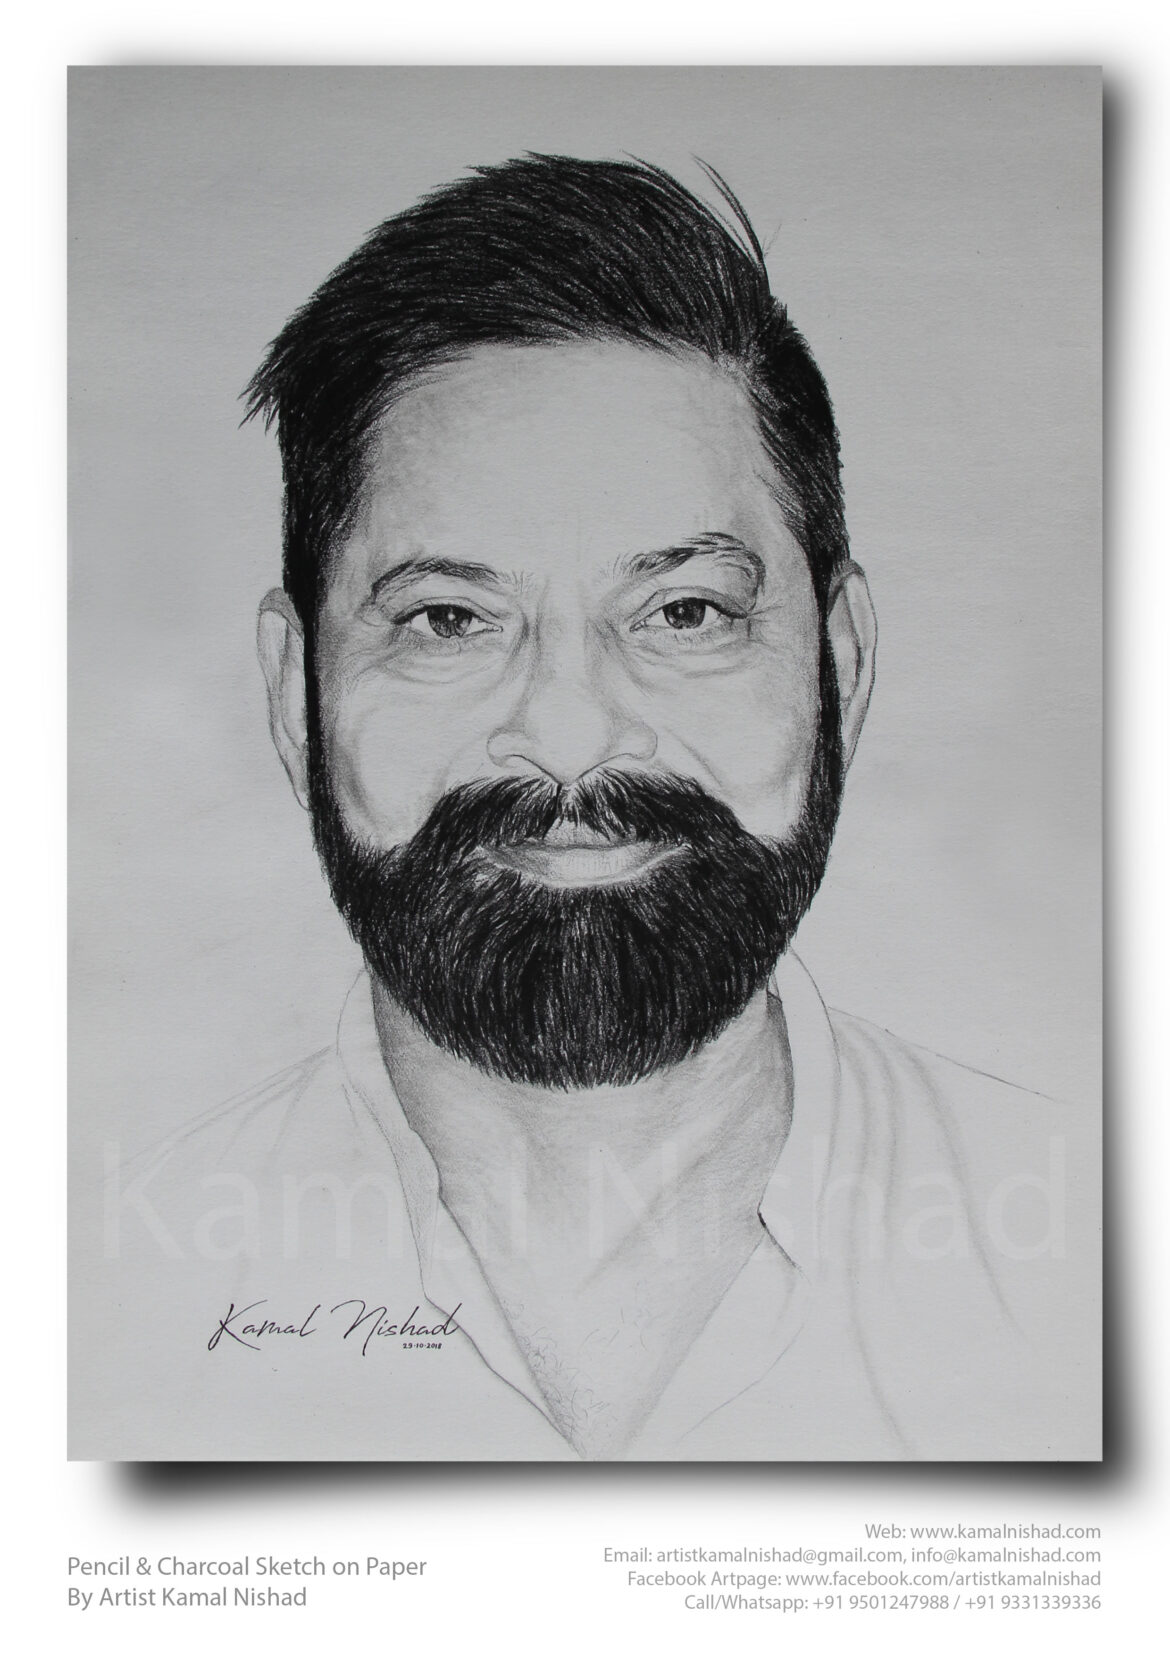 A MAN WITH SMILE | Pencil & Charcoal Sketch This is a Handmade Sketch made with Pencil & Charcoal “A MAN WITH SMILE”. One of my client/customer (GIRL) wanted me to draw her “Special One’s” portrait for his birthday gift. SIZE: A3 Created by © Kamal Nishad. All rights reserved.